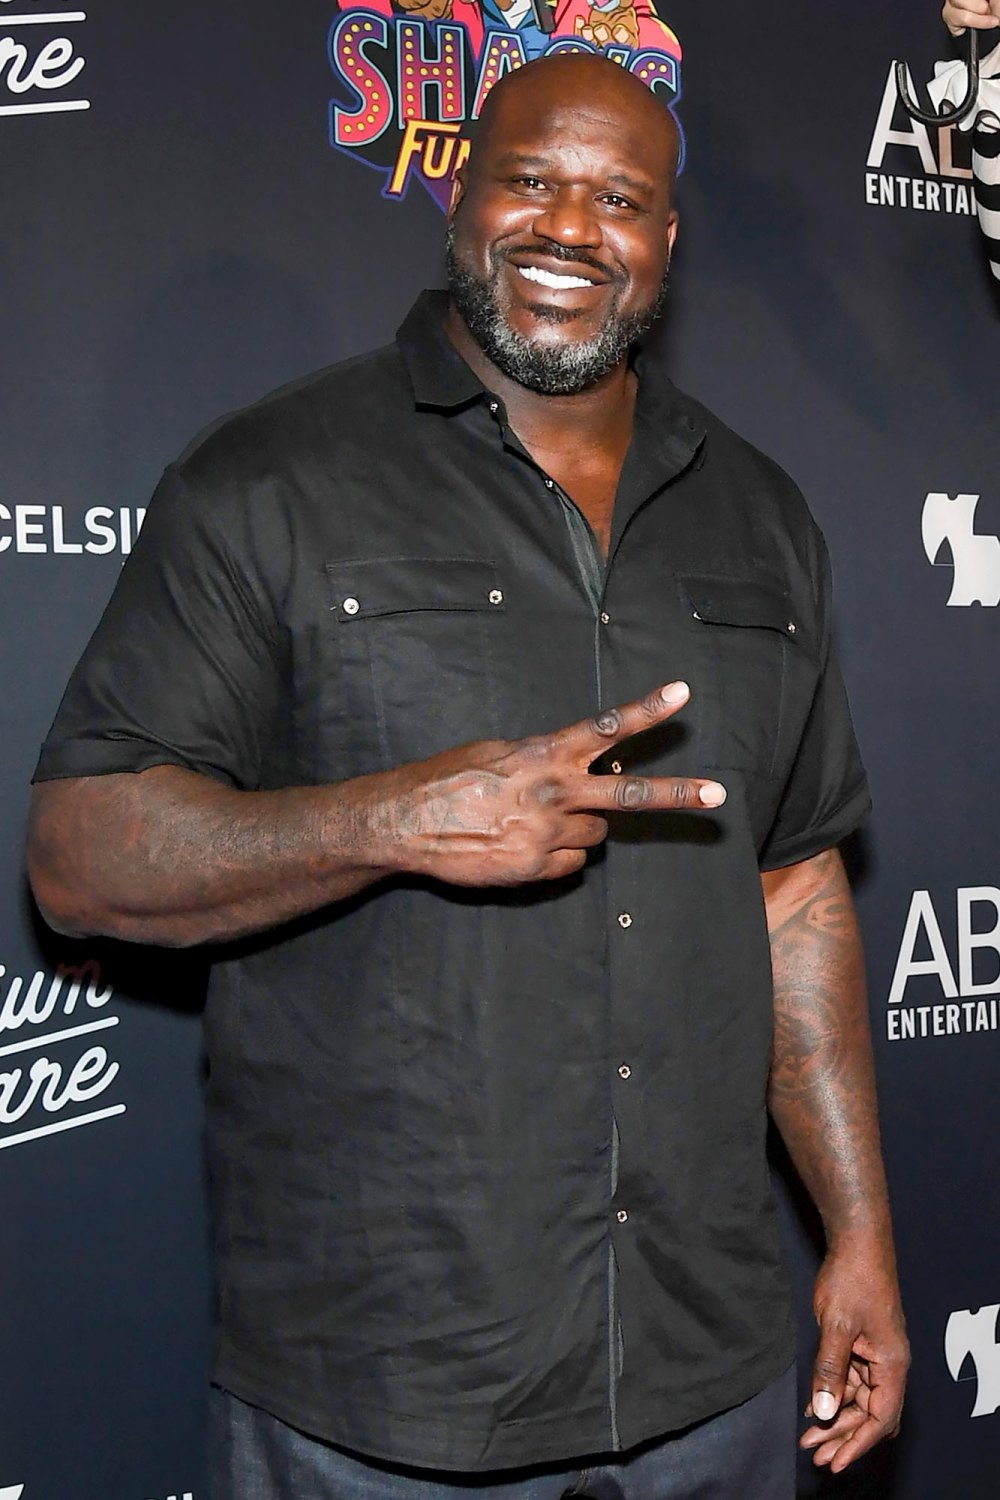 Shaquille O’Neal Reveals He Spends $1,000 on This Self-Care Treatment